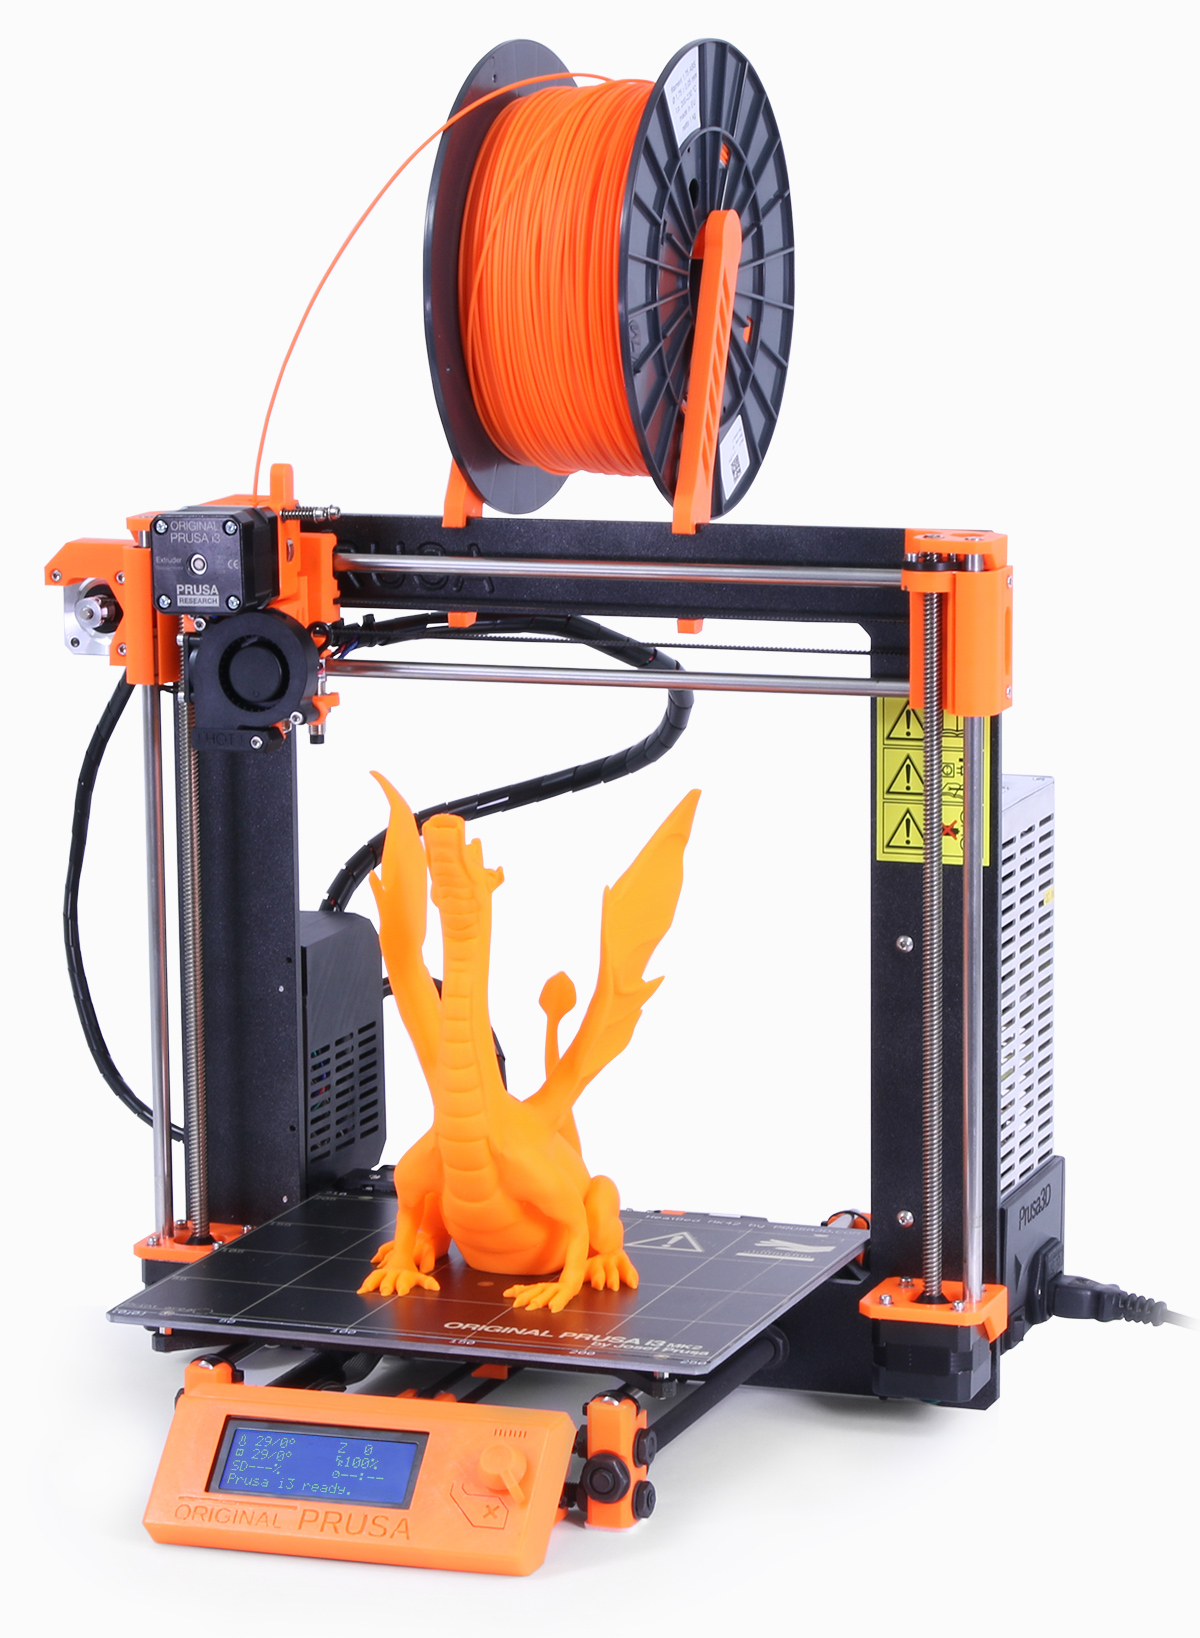  The Prusa i3 MK2 now includes a powerful automated calibration system 